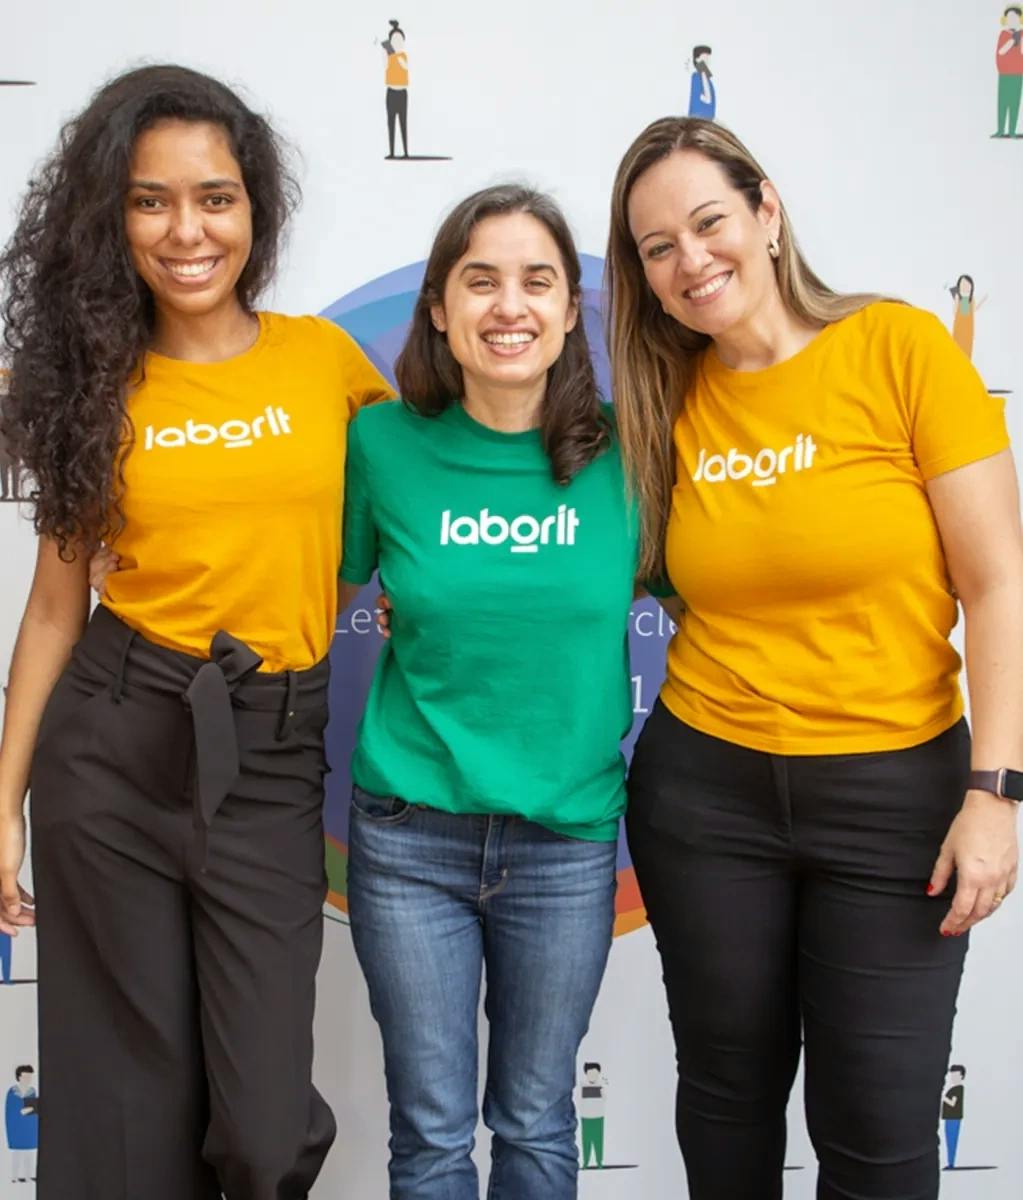 Labers gathered during Laborit event. From left to right: Rhaysa Ferreira (Growth Marketing), Natalia De Marco (Designer) and Telma Correa (CEO).